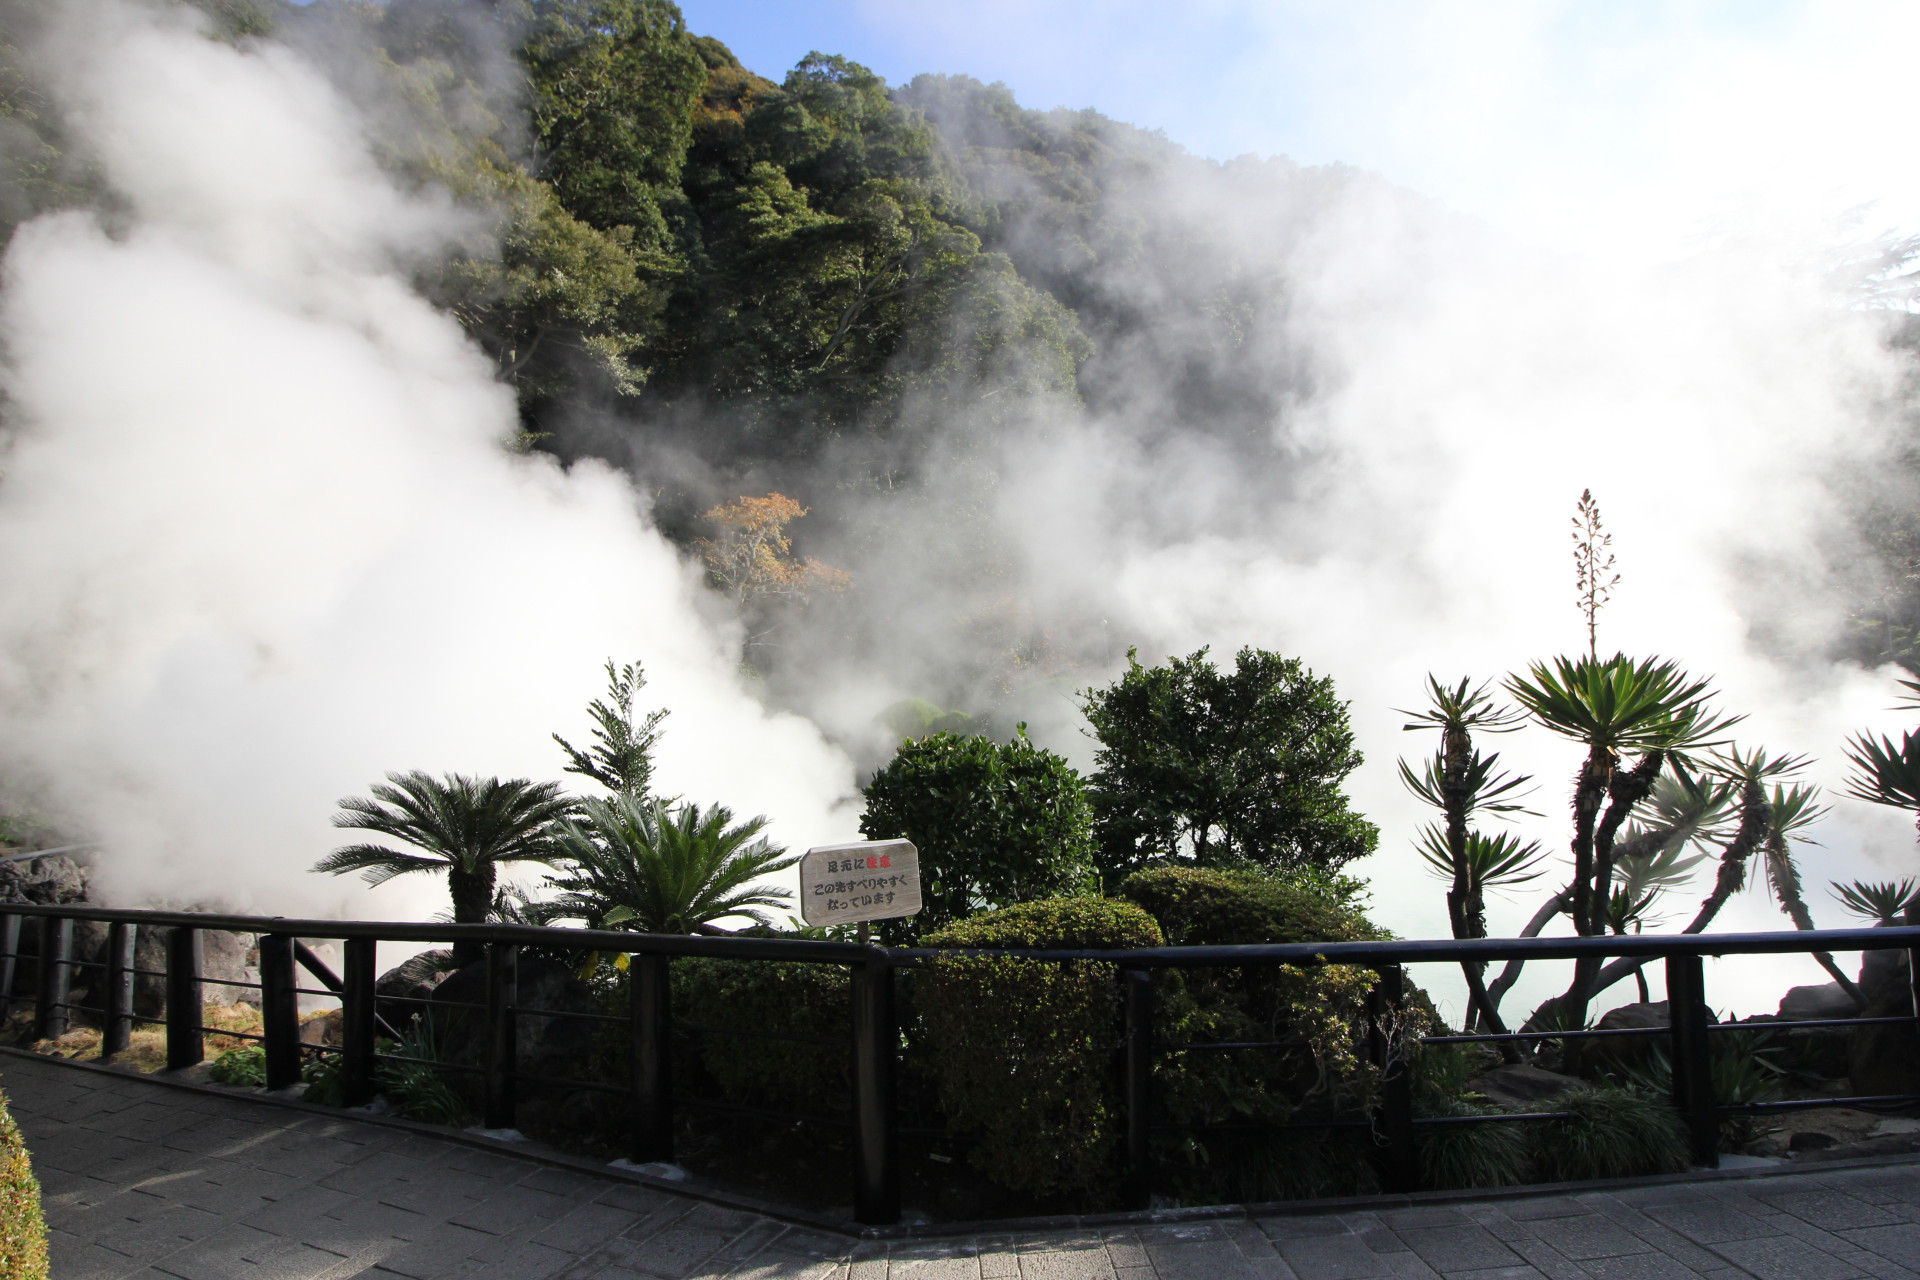 But what most draws tourists to Beppu are something which may seem scary: the Hells of Beppu.<p>You may also like:<a href="https://www.starsinsider.com/n/197356?utm_source=msn.com&utm_medium=display&utm_campaign=referral_description&utm_content=183441v2en-ae"> Actors who played roles outside their comfort zone</a></p>